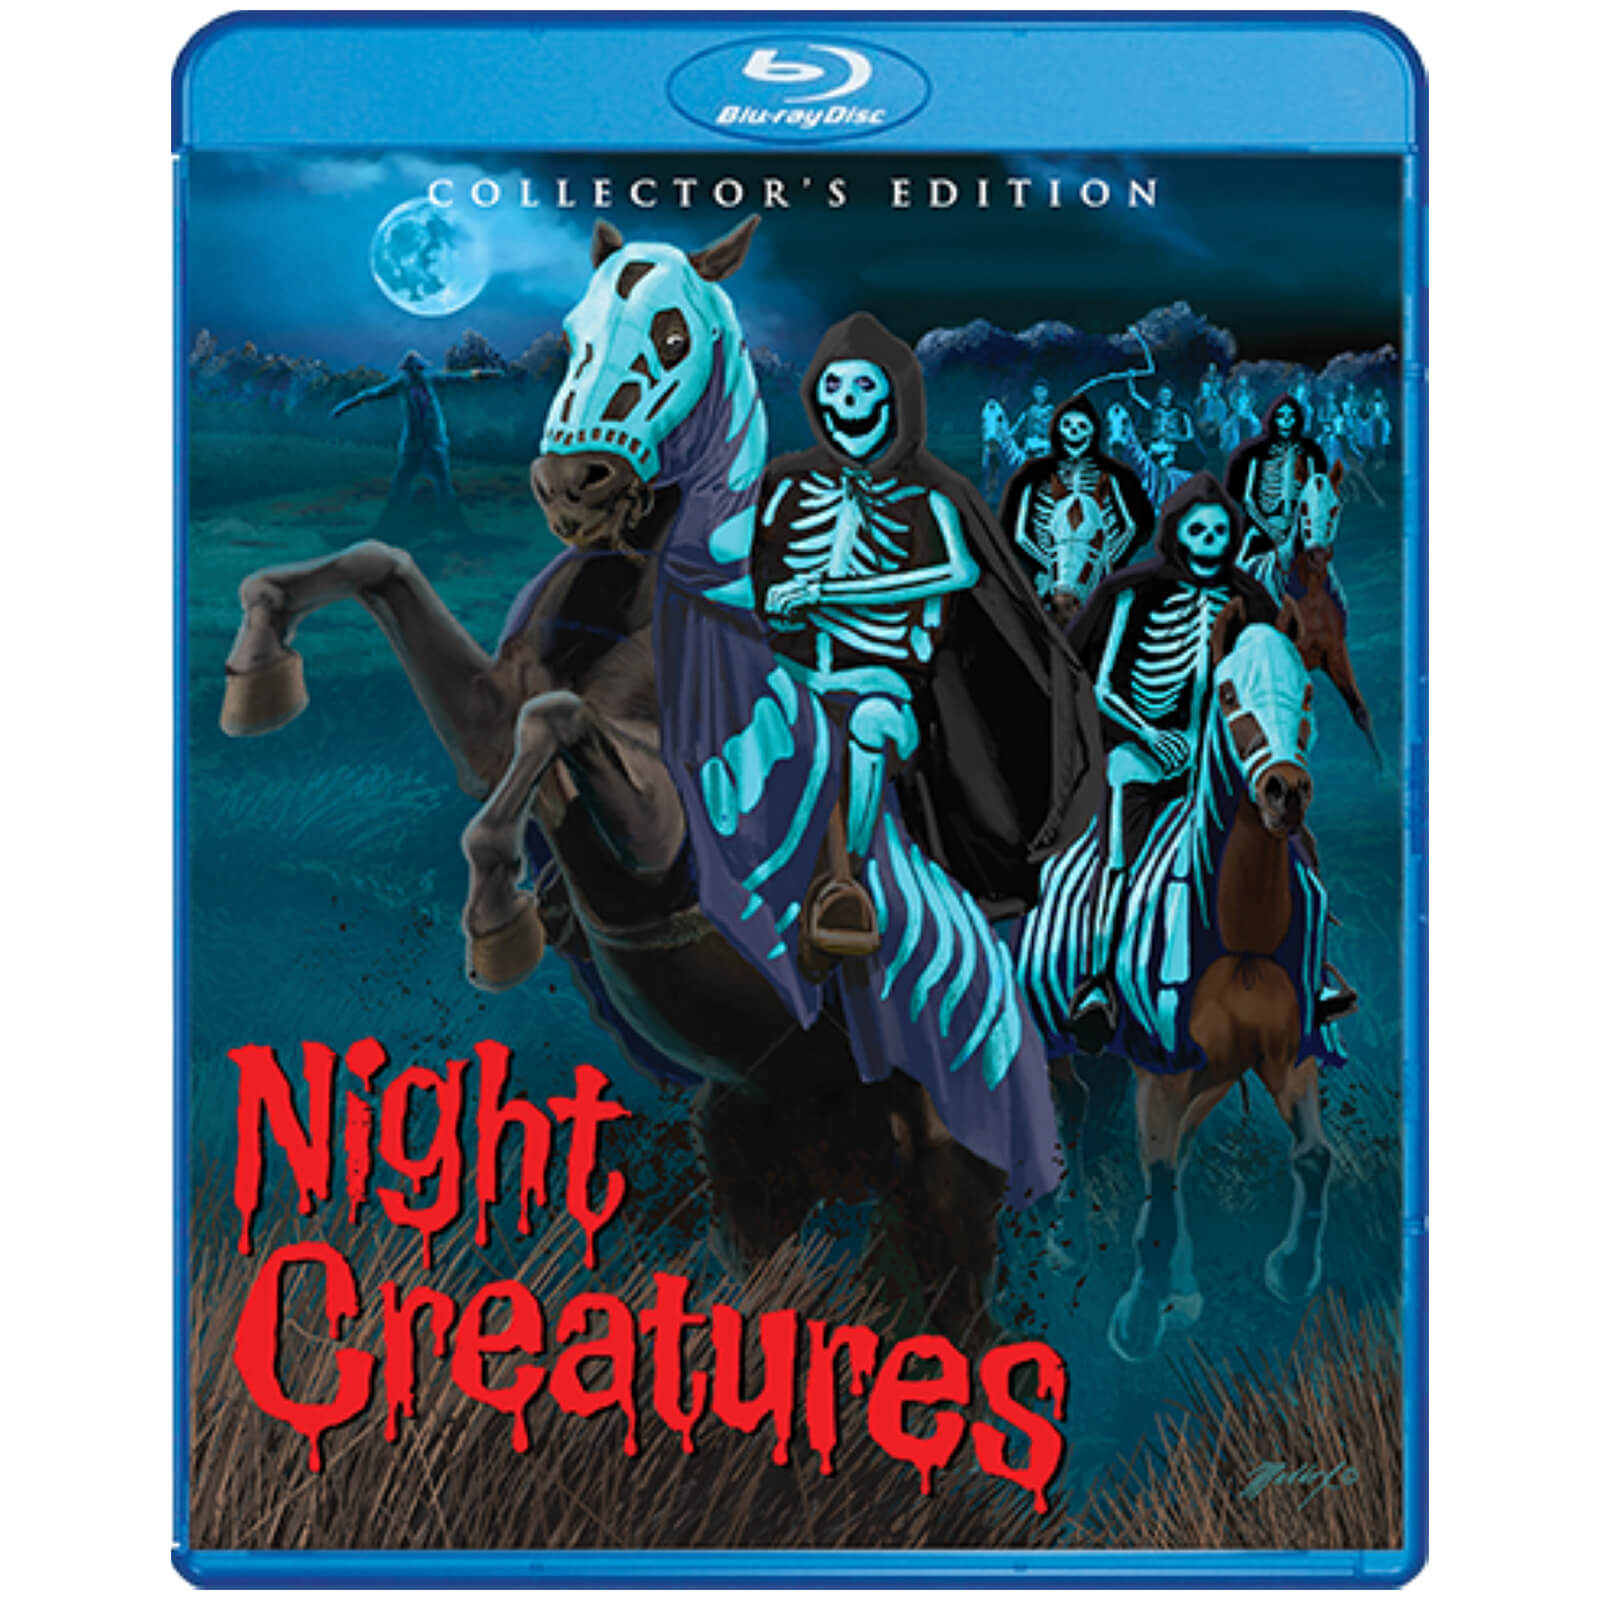 Night Creatures: Collector's Edition (US Import) von Shout! Factory